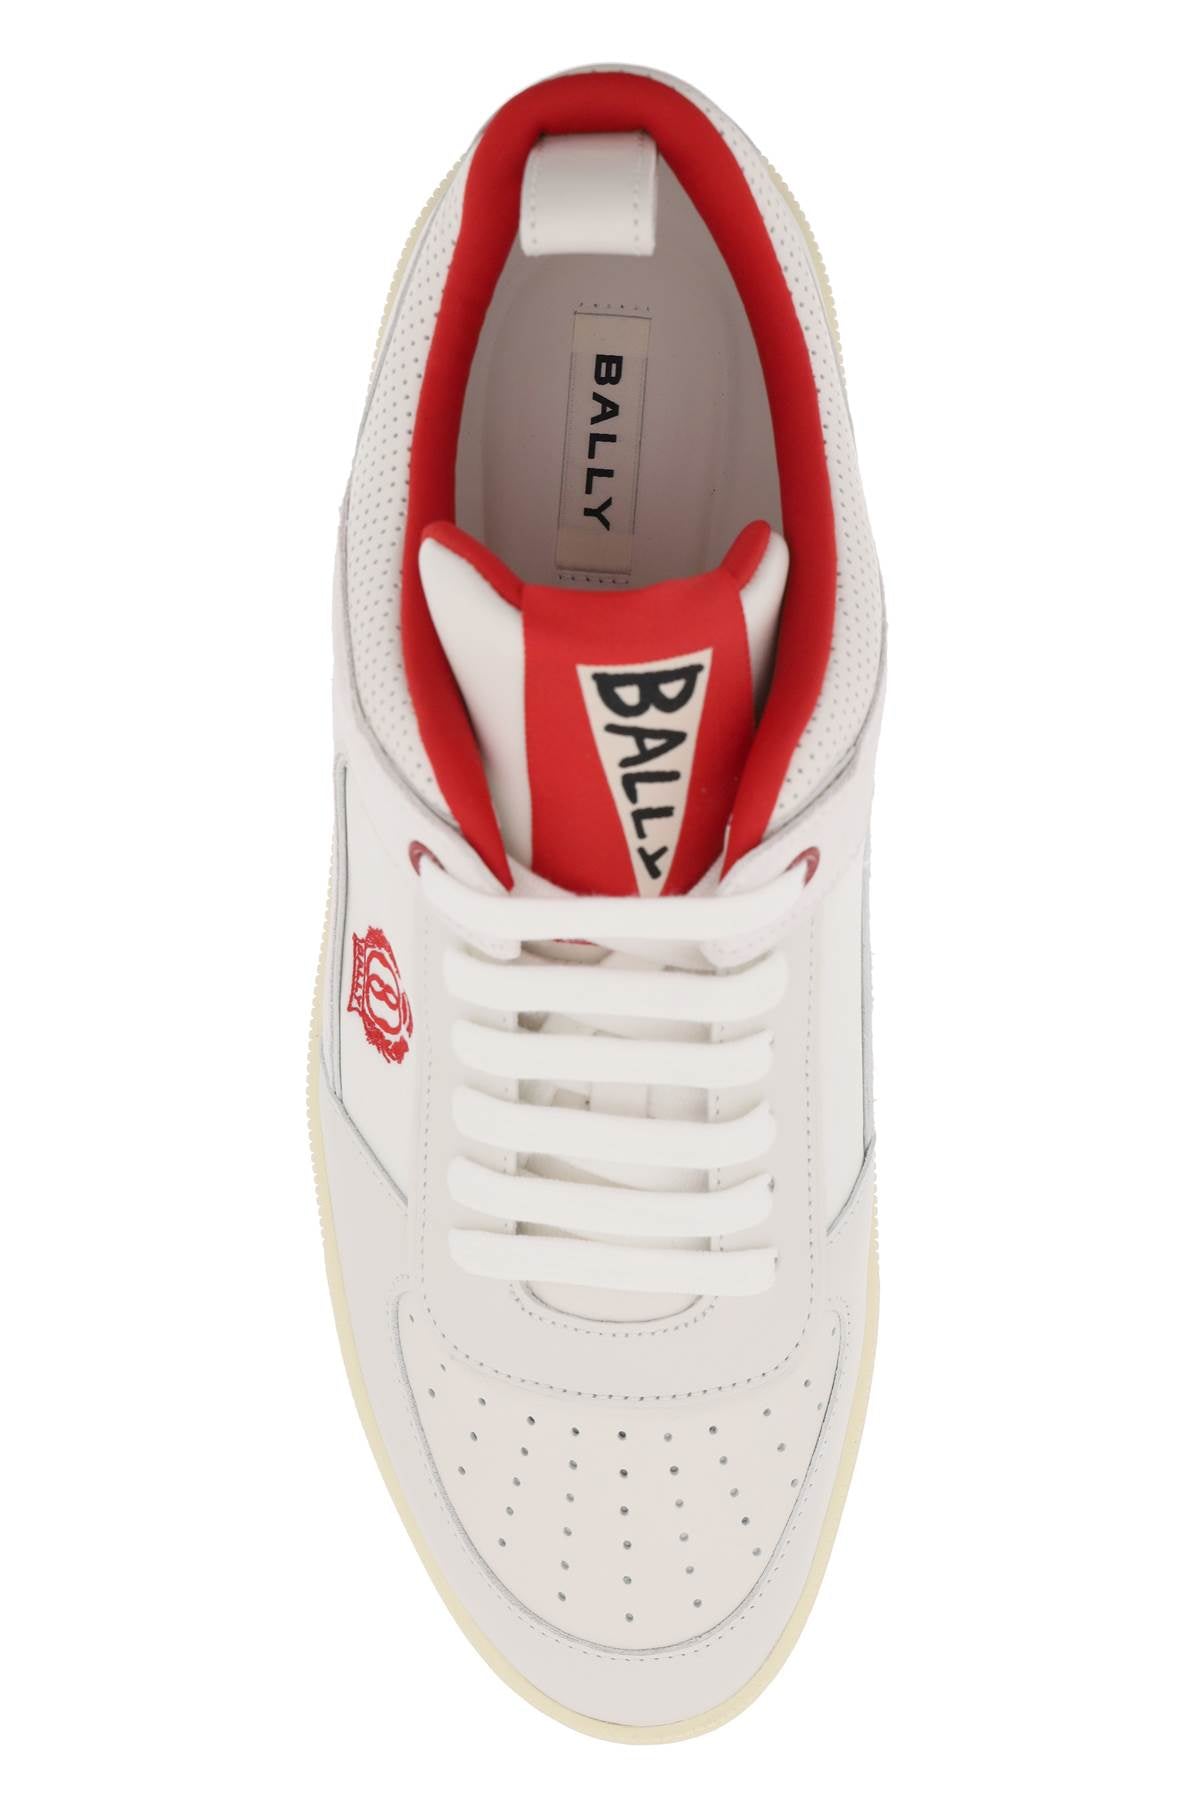 BALLY Men's Leather RIWEIRA Sneakers with Perforated Details and Monogram